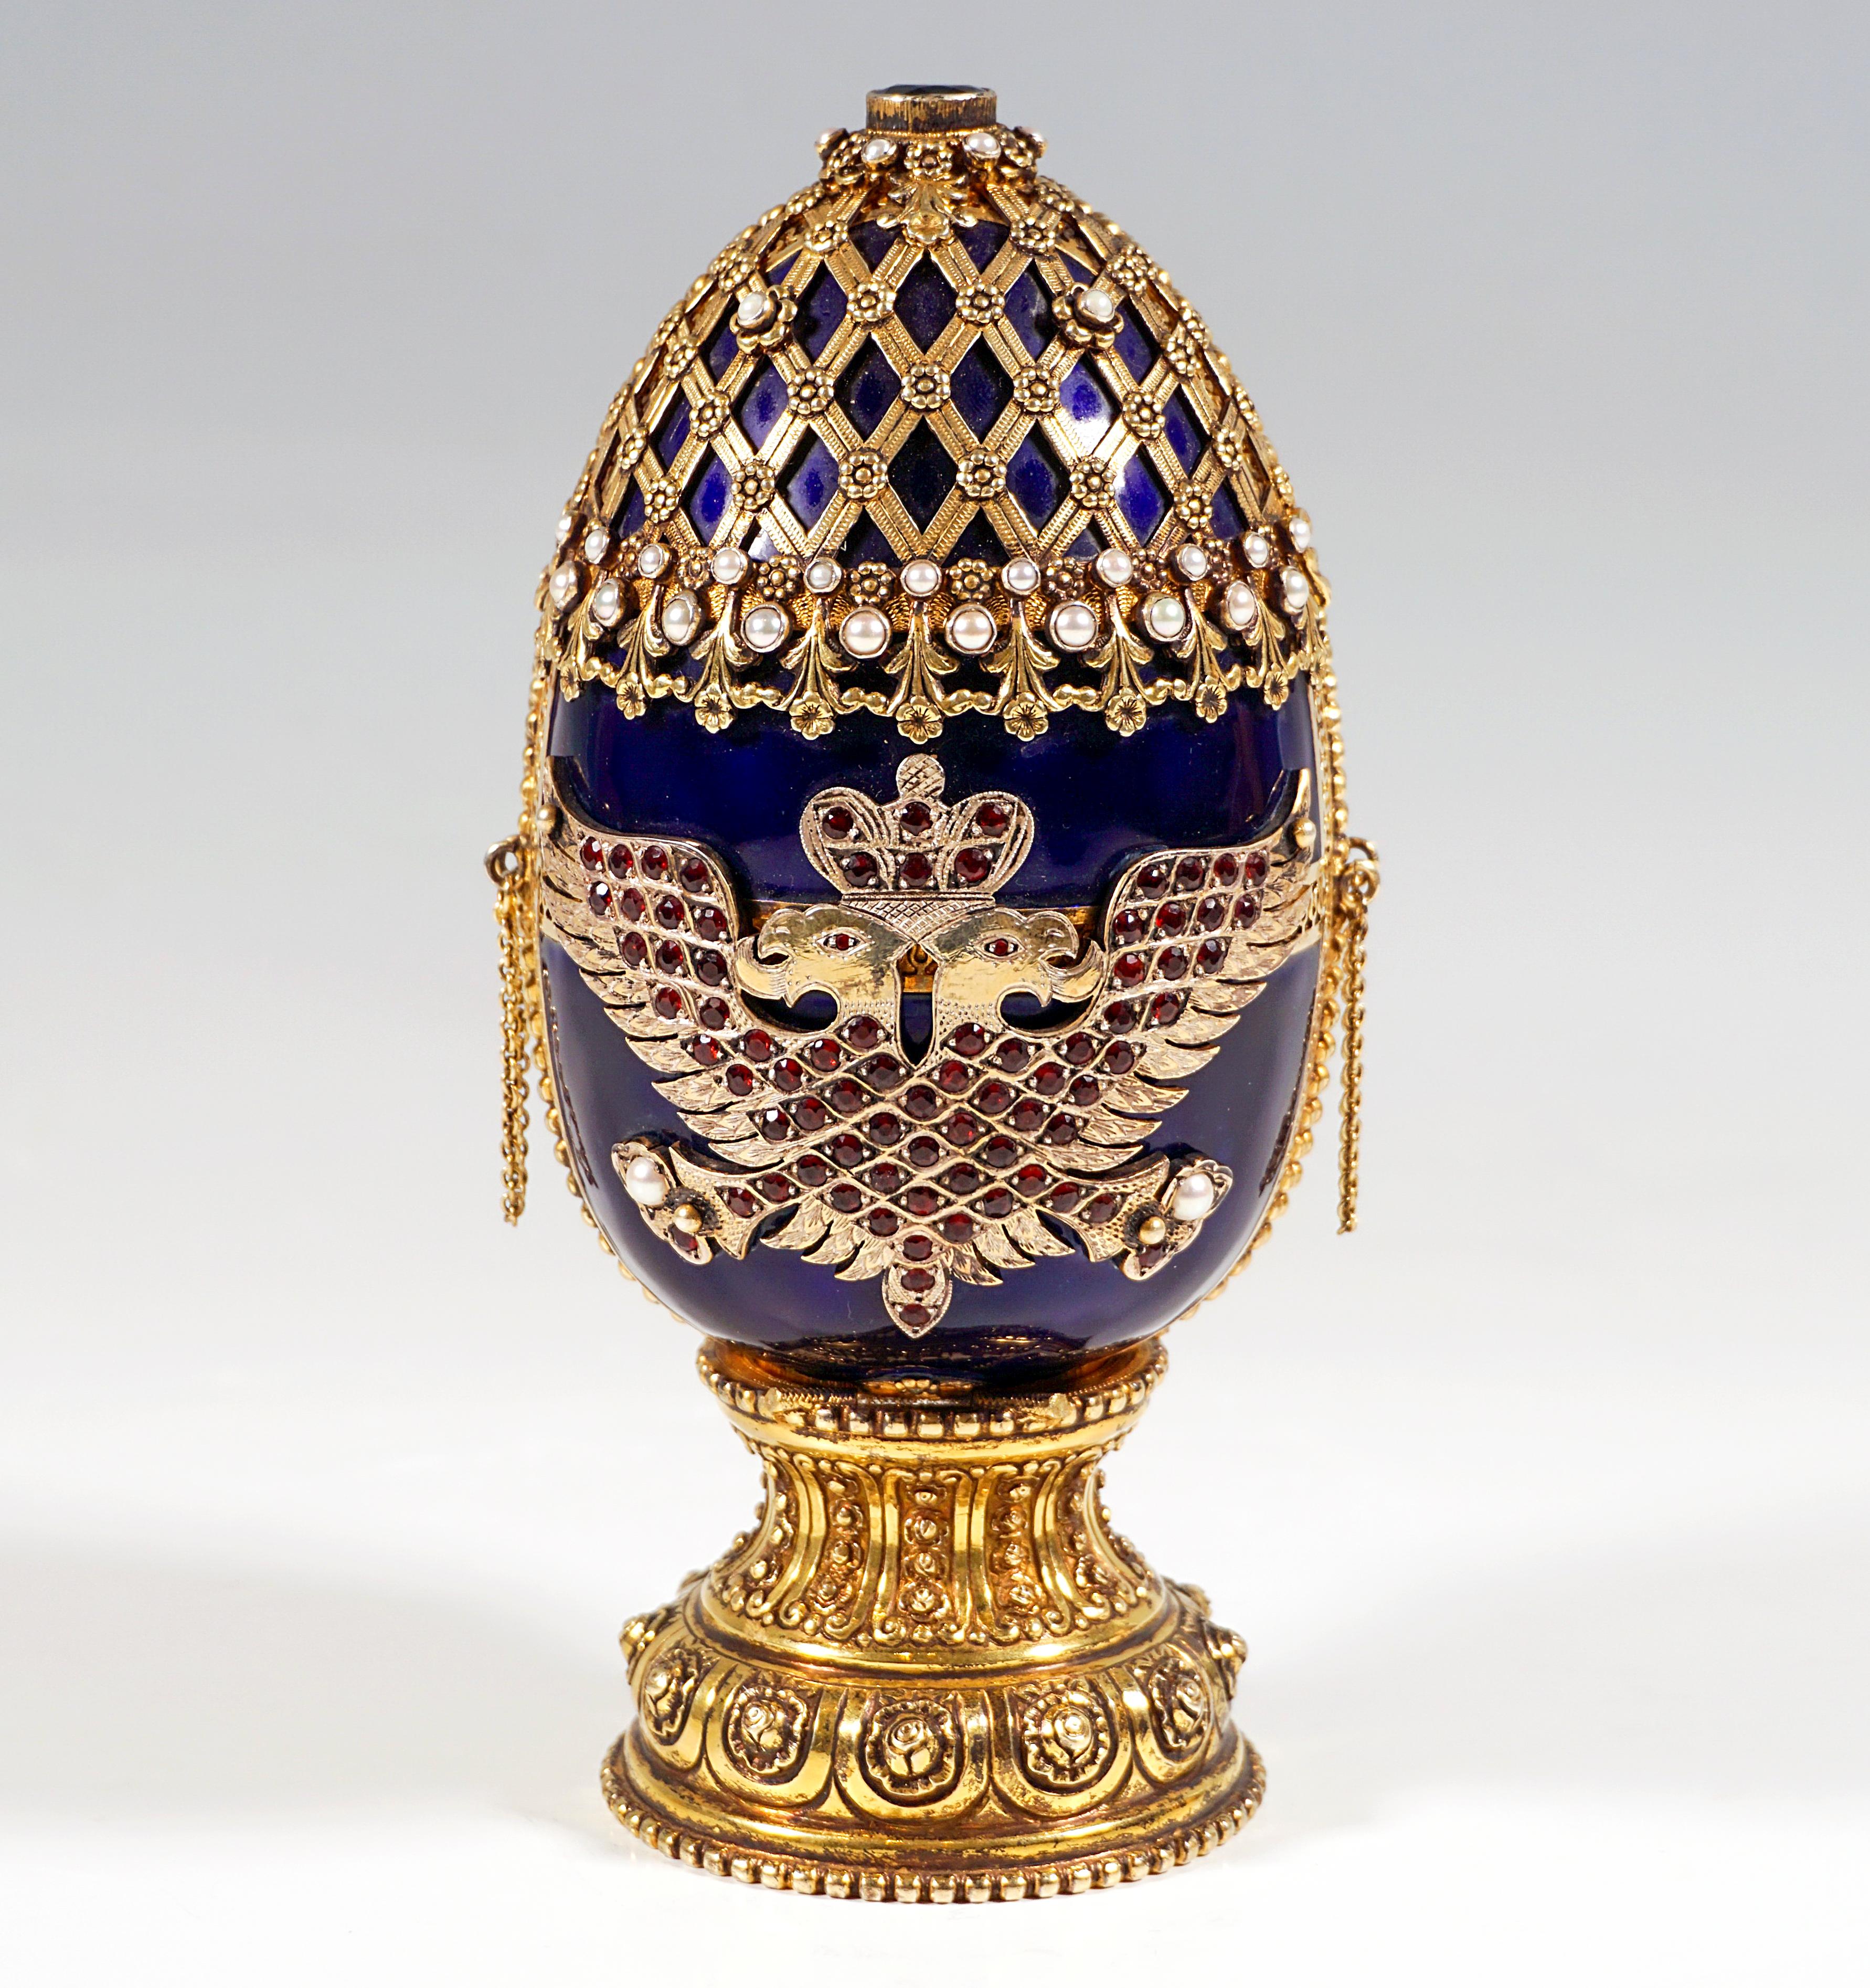 Cobalt blue enamelled decorative egg on a constricted round base with rosette ornaments, the front and back wall each covered with a double-headed silver eagle with set polished garnets on one side, with pearls on the other side, above, on the upper